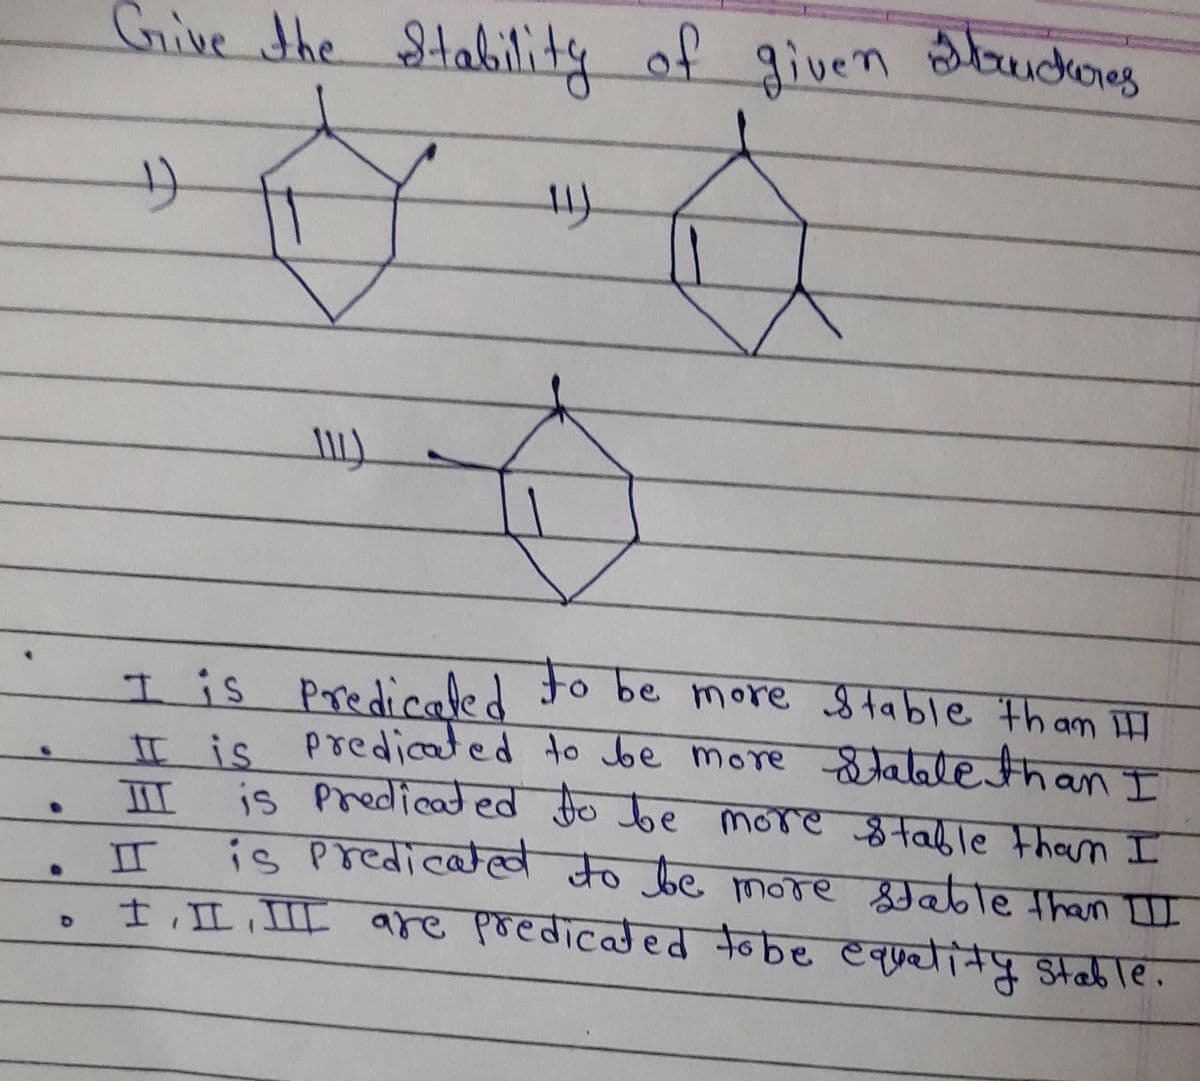 Grive the Stalility
of given luckores
is Predicaled
II is predicated to be more fallethan T
is Predicated fo be
I to be more Stable tham ilI
more Stable than I
II
is predicated to be more Stable than II
. II
f,L III are predicated tobe equetity Stab le.
